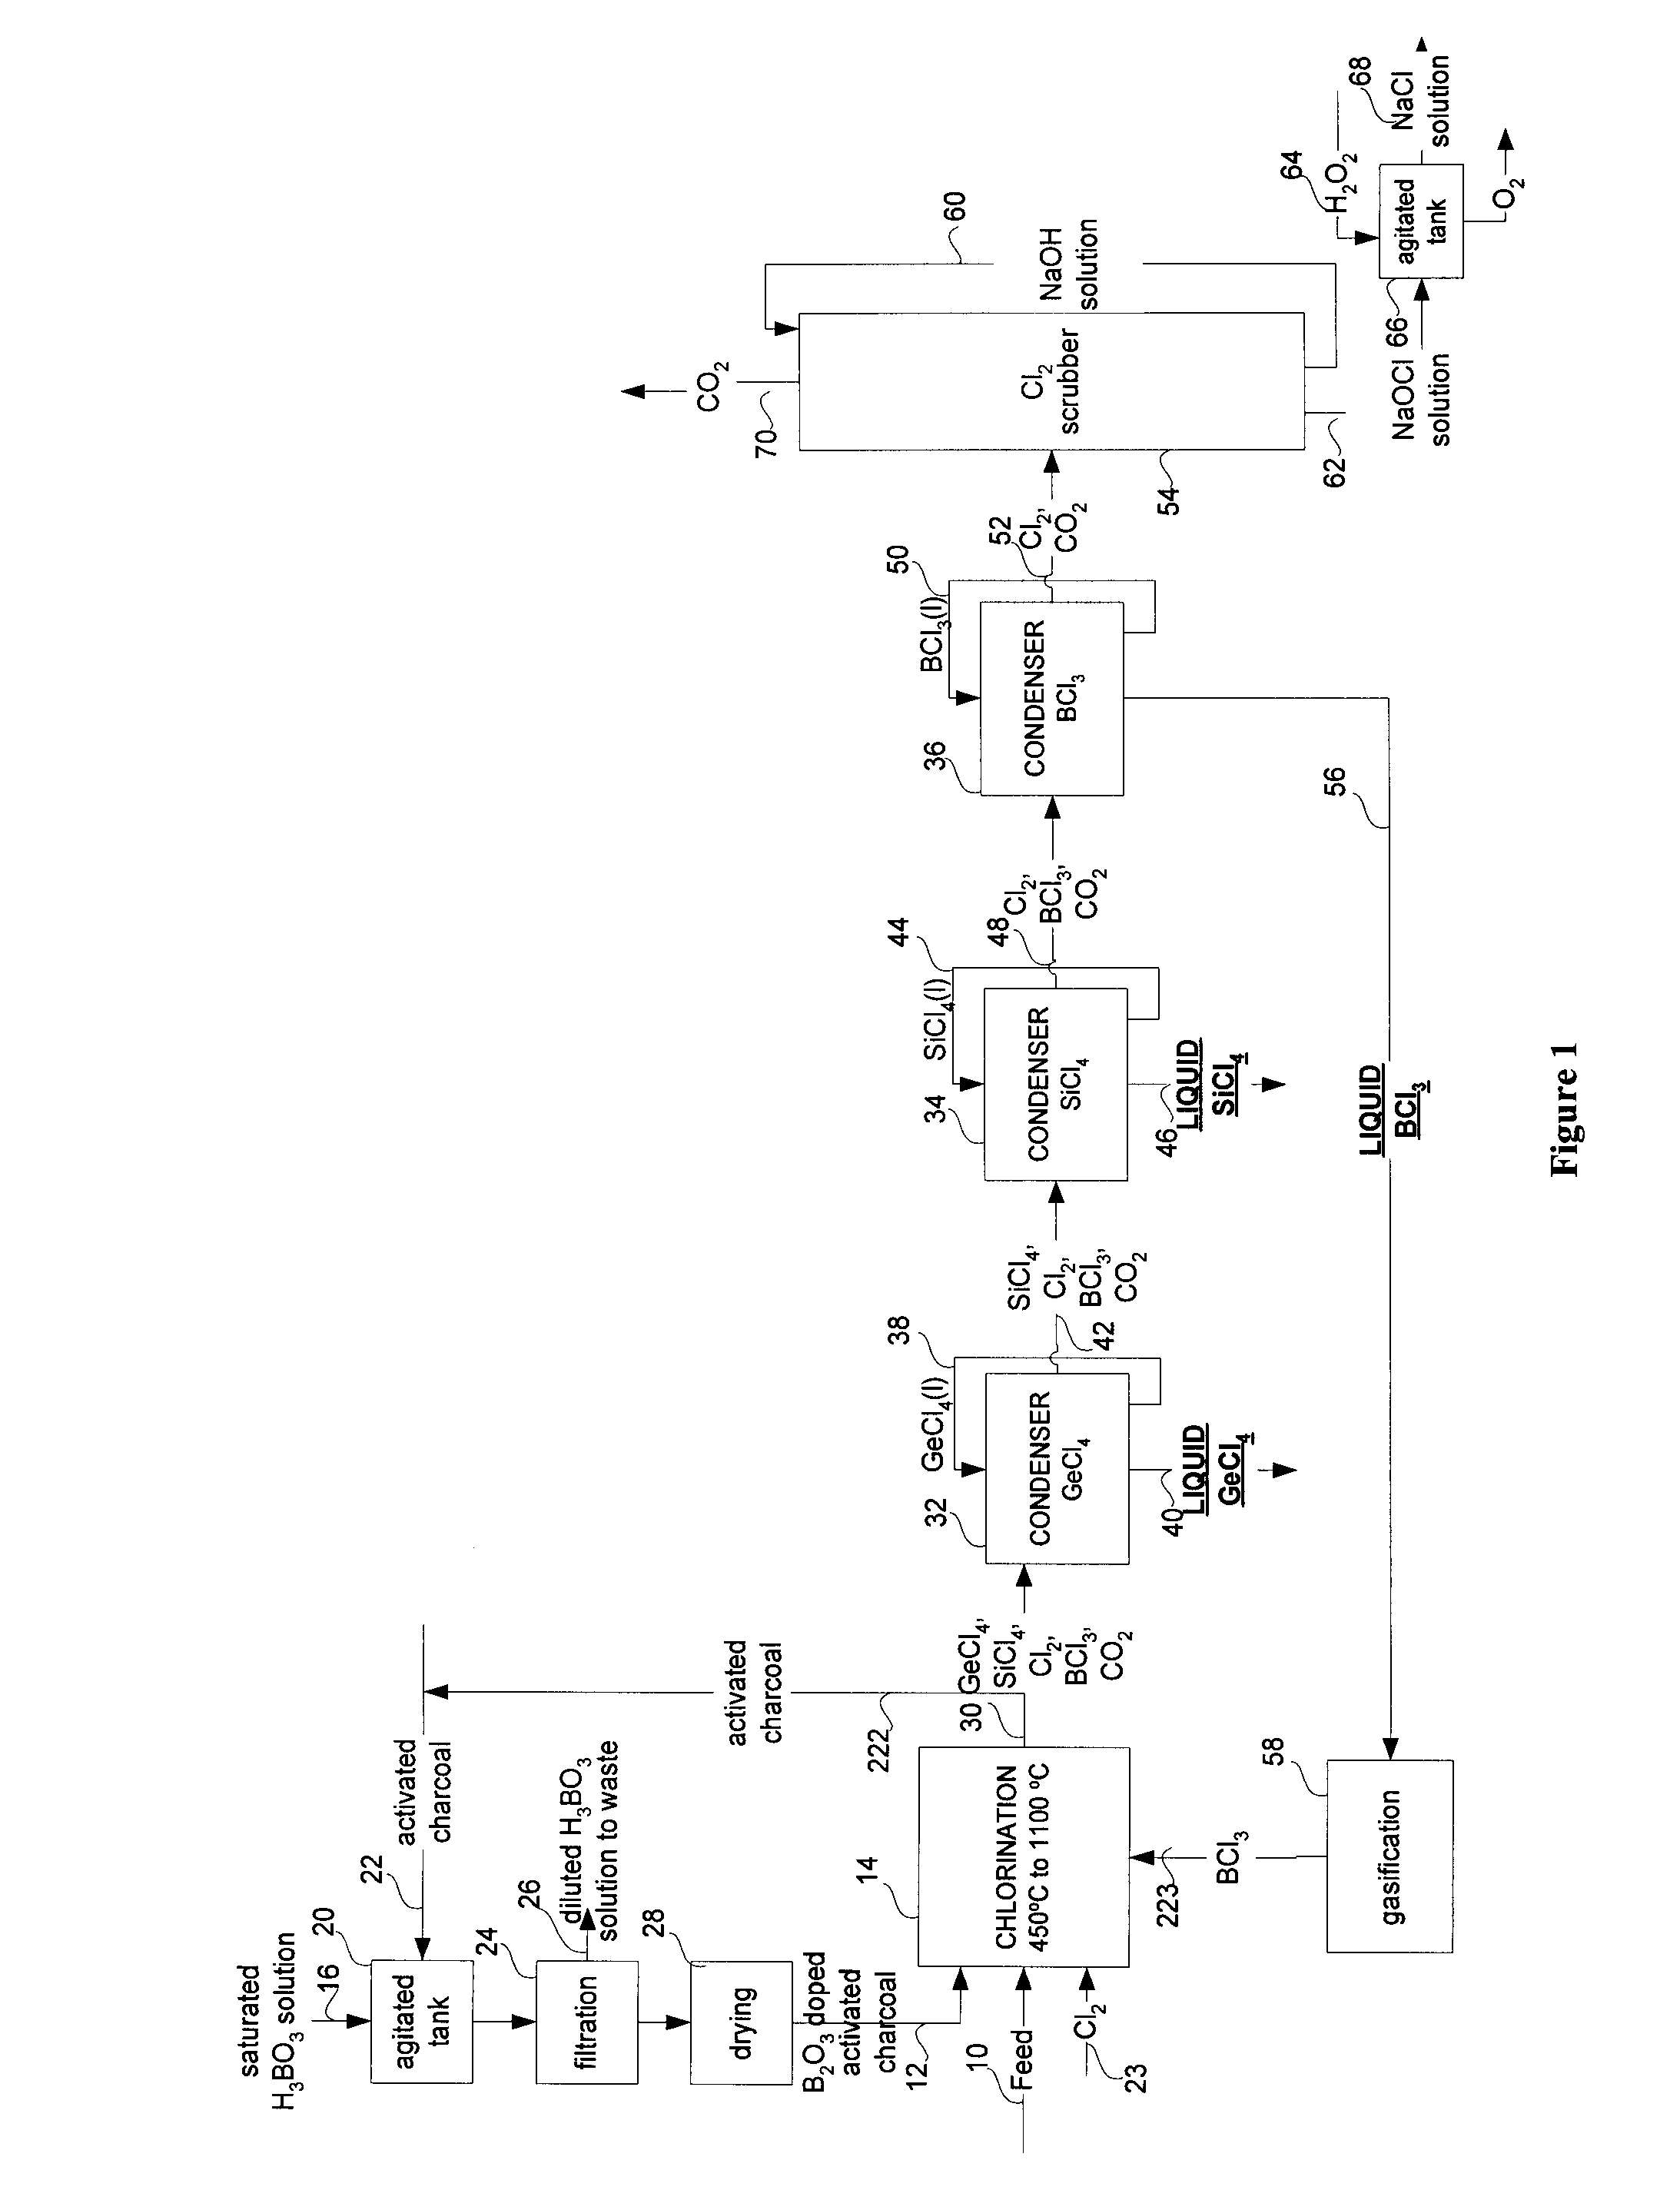 Gecl4 and/or sicl4 recovery process from optical fibers or glassy residues and process for producing sicl4 from sio2 rich materials